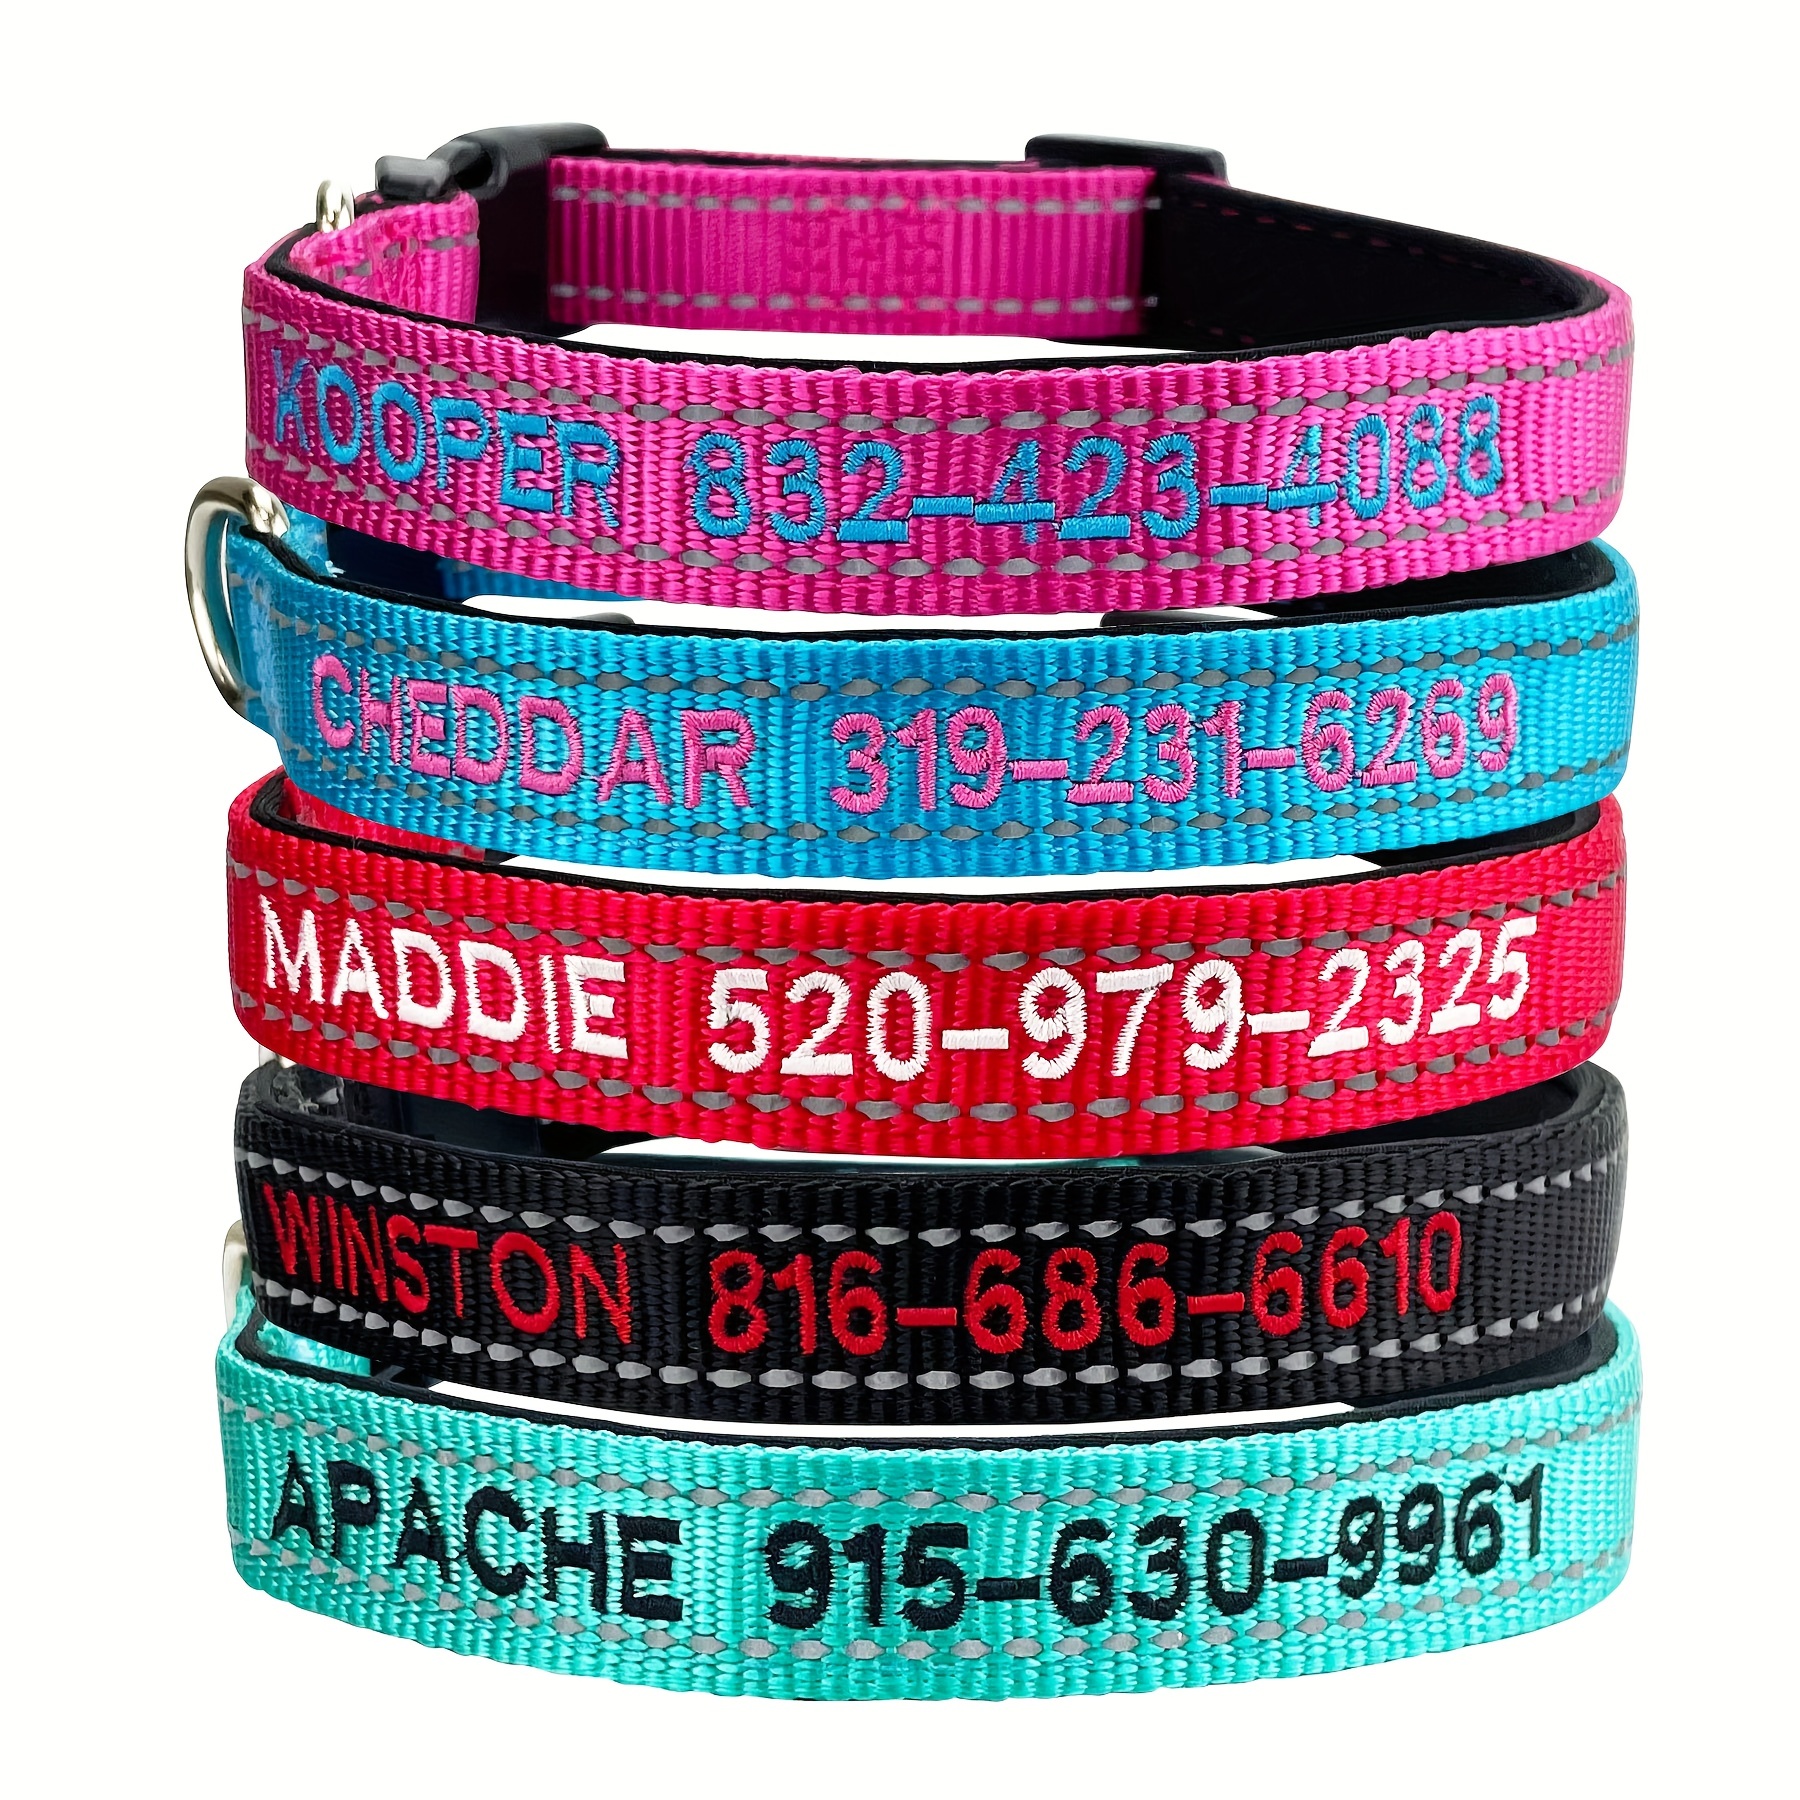 

Custom Reflective Dog Collars With Embroidered Name, Personalized Pet Collar For Large Medium Small Dogs